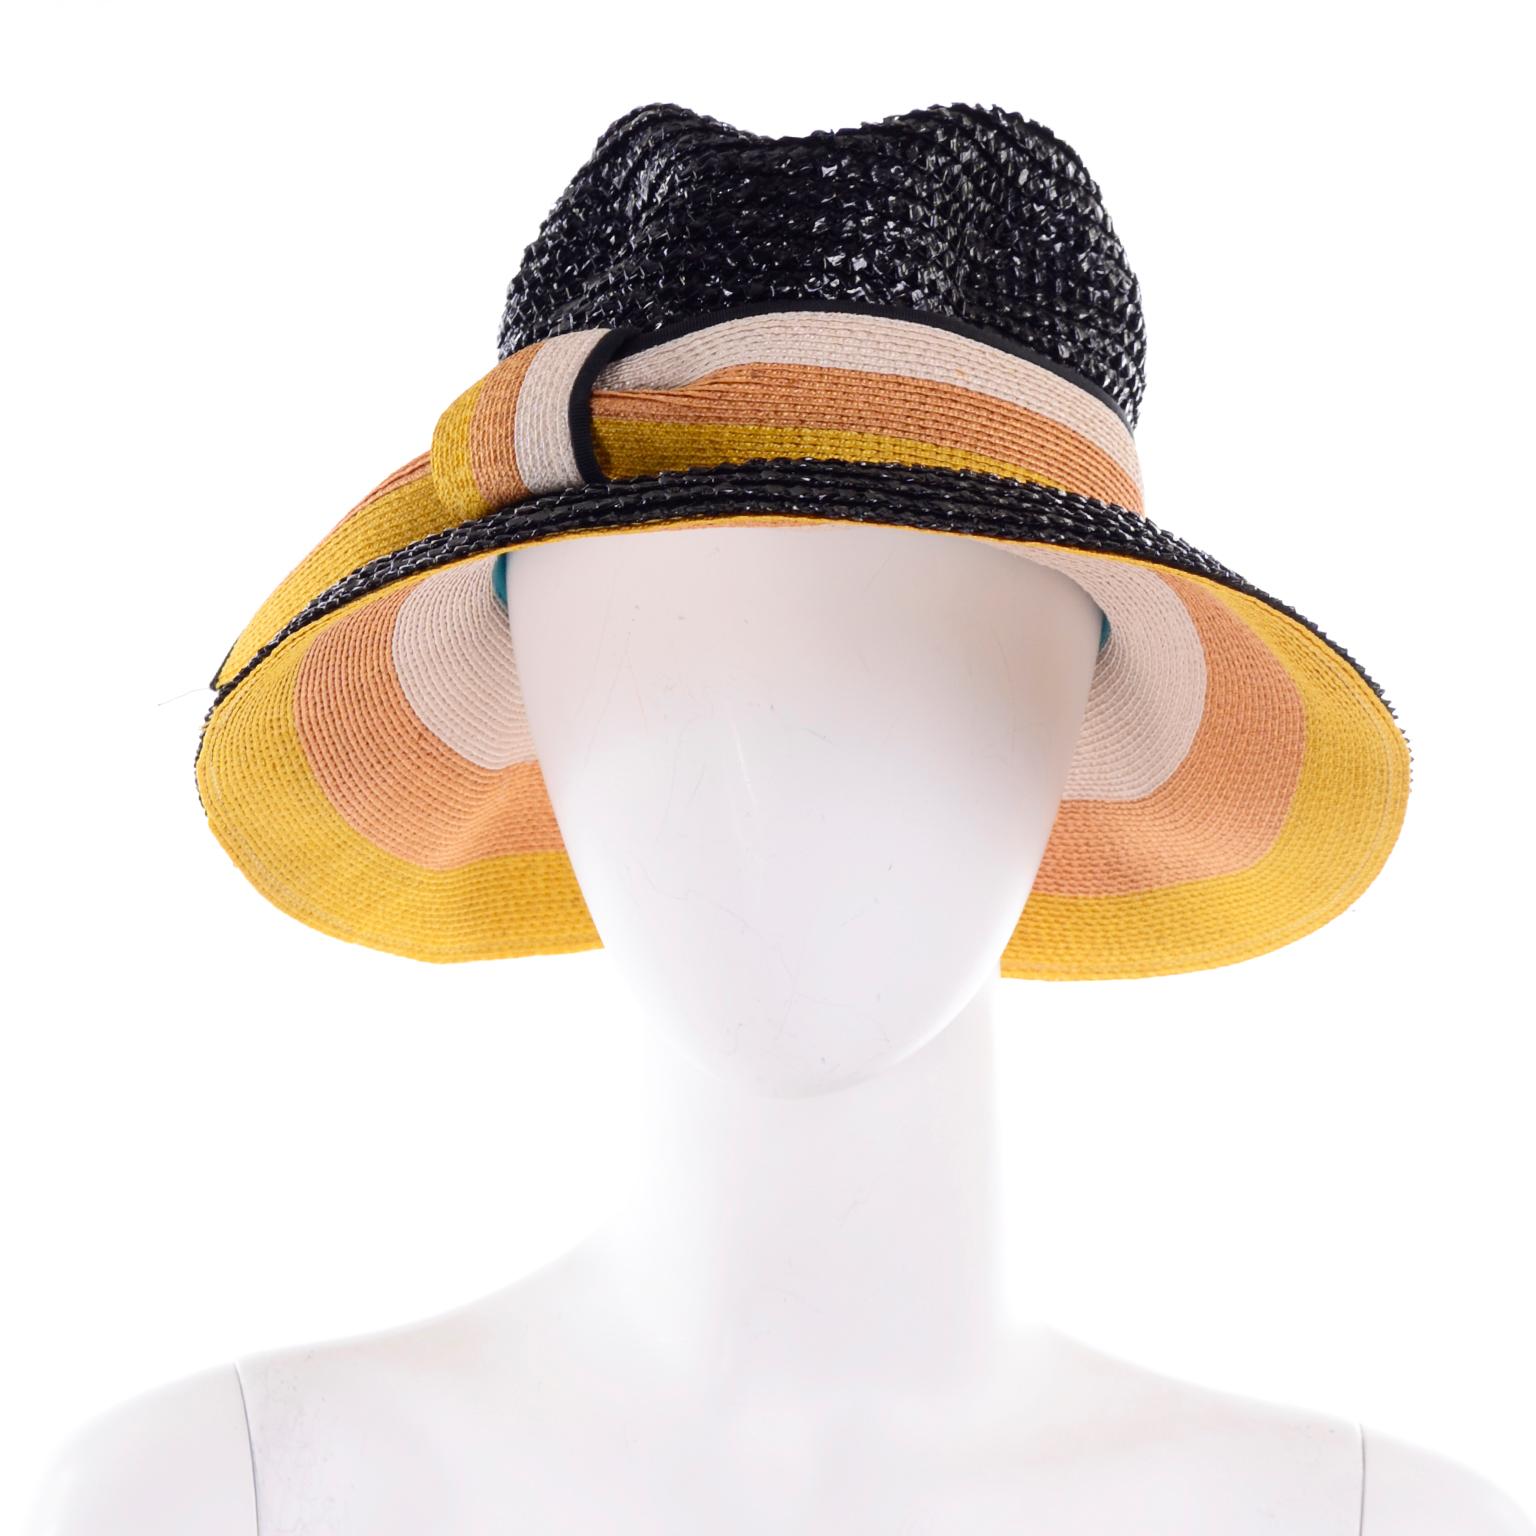 This is a deadstock vintage Yves Saint Laurent straw hat with the original tags still attached. This is a great glossy black woven straw hat with yellow, tan, and cream striped ribbon detail.. The underside of the hat is the same striped colors as